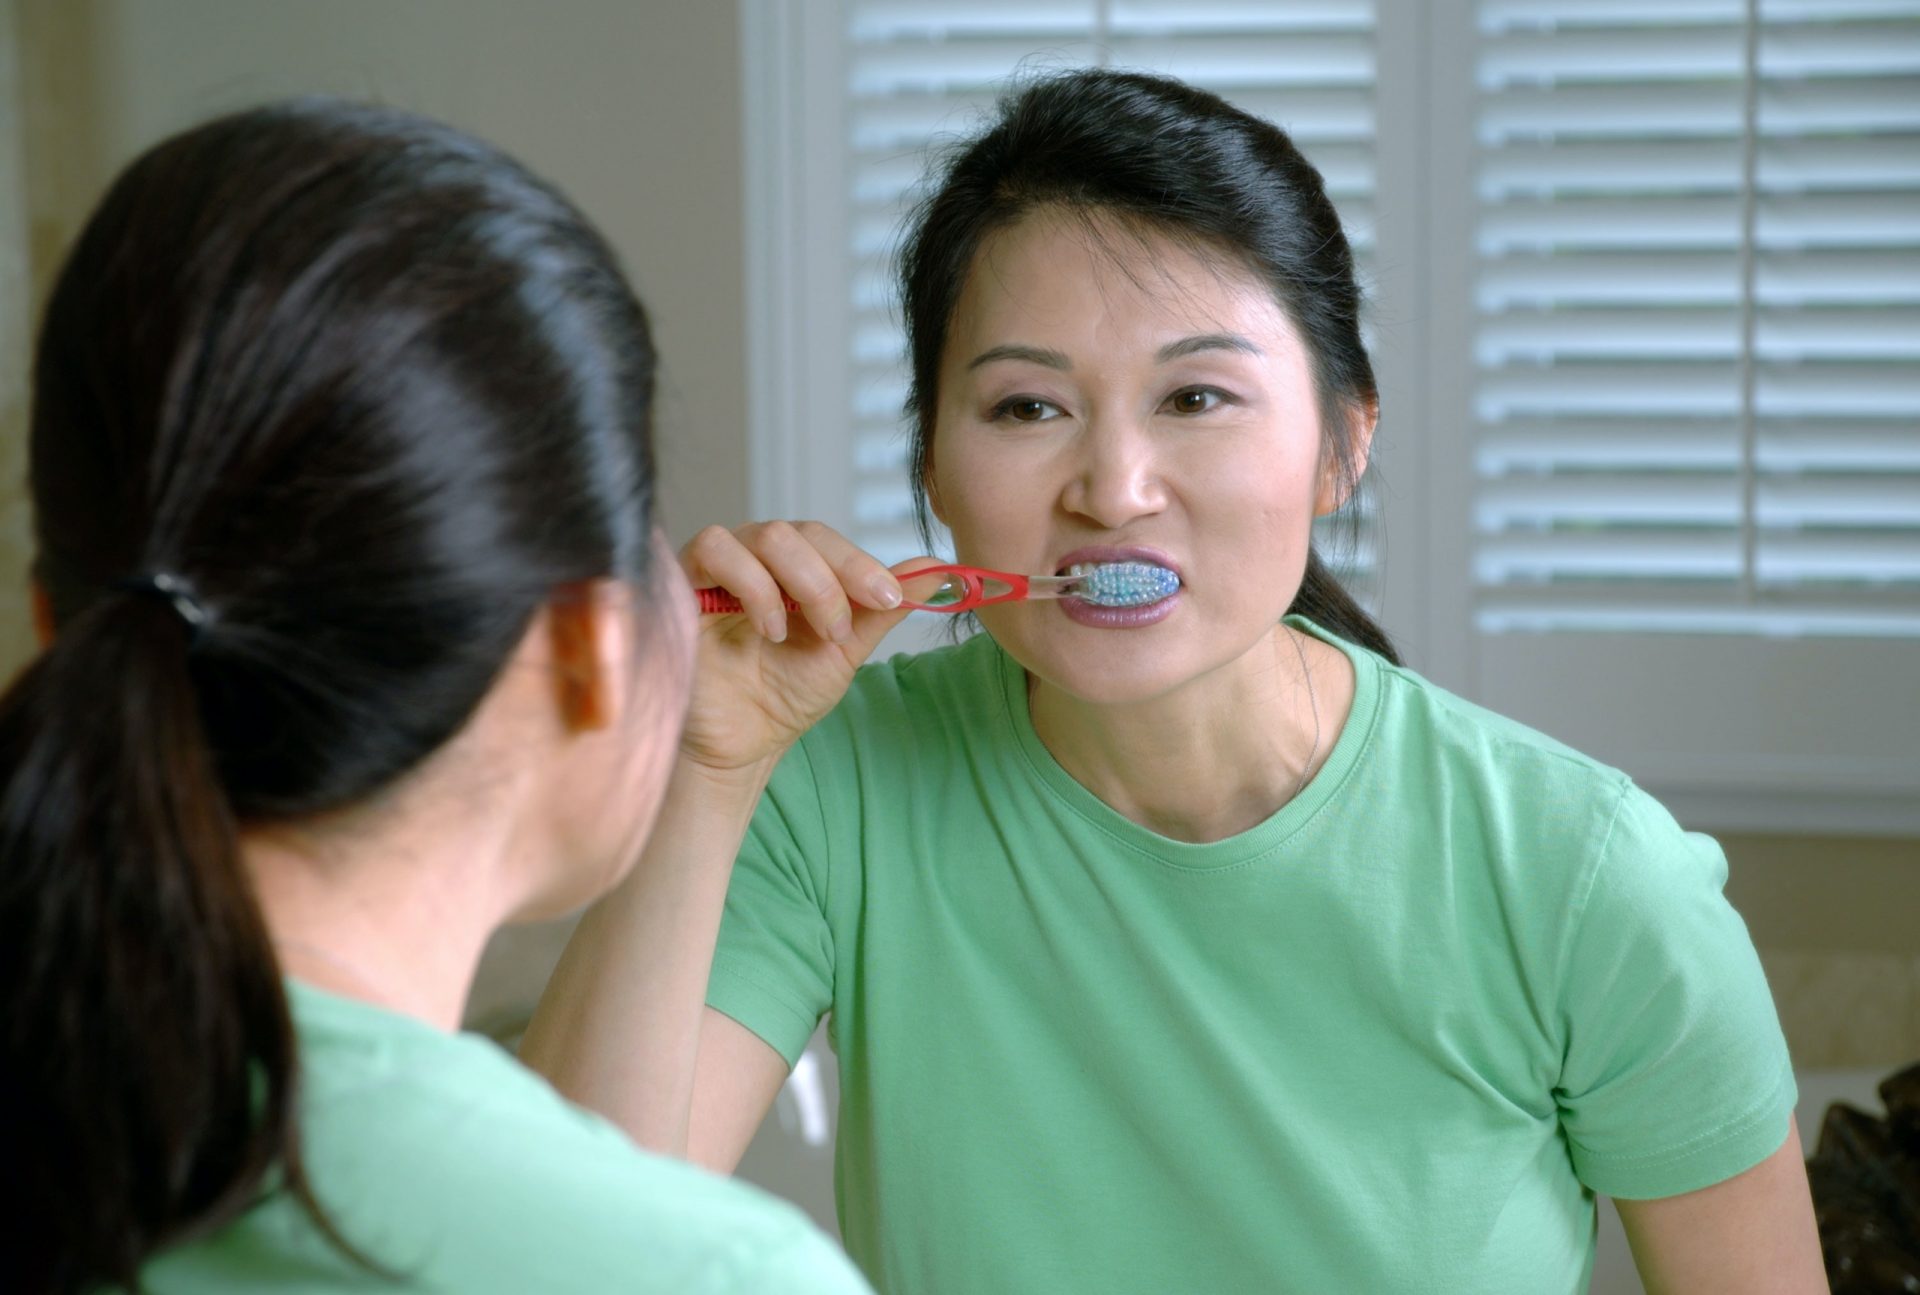 Woman brushing her teeth could be setting herself up for fluoride poisoning.